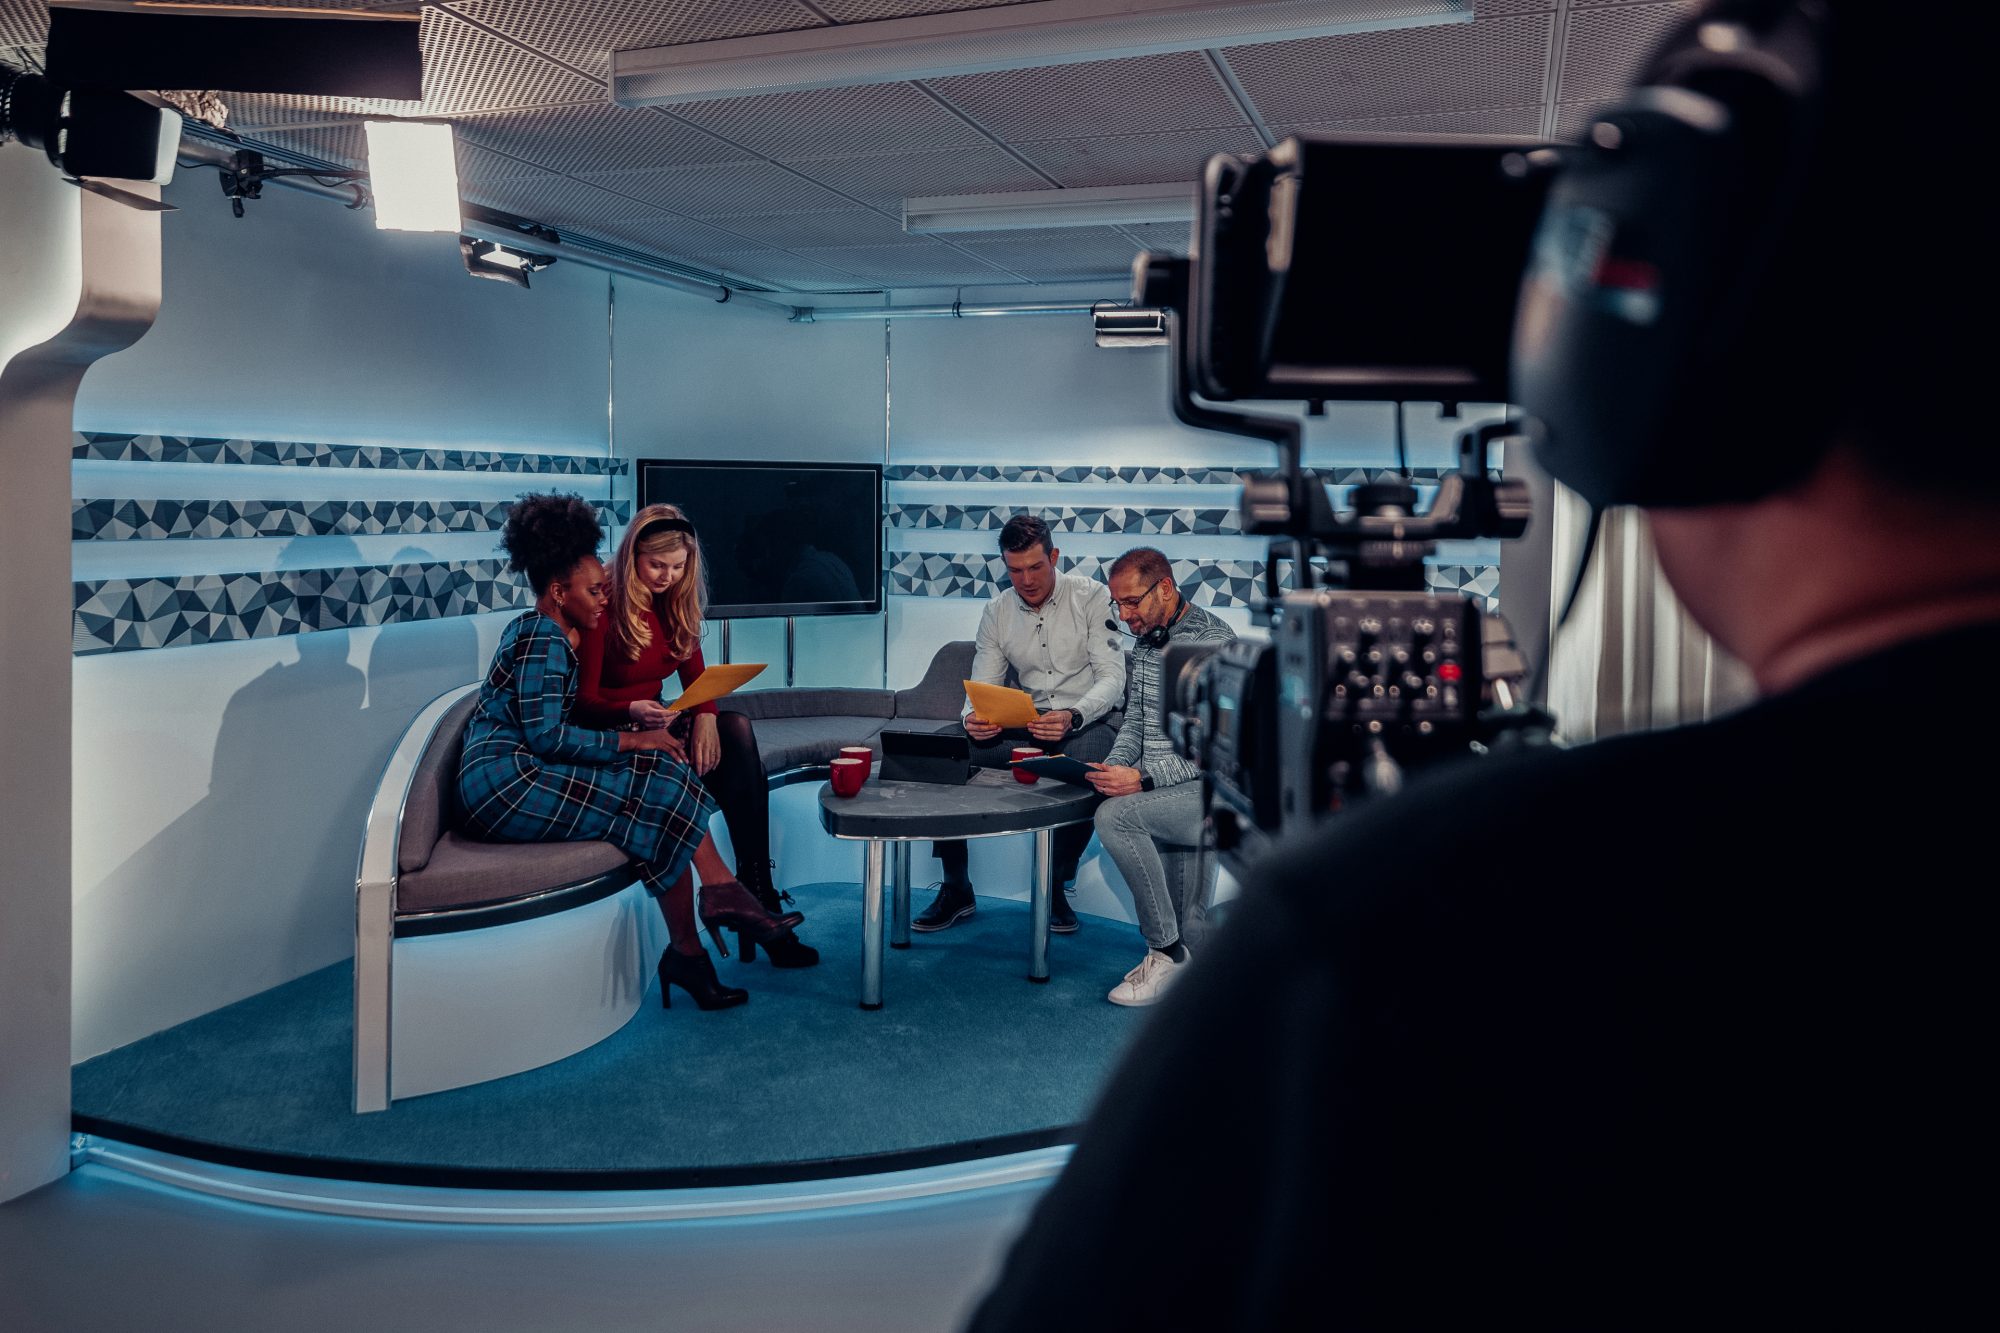 Over the shoulder view of a TV show in the process of being filmed in a studio. The presenters are sitting on the studio sofa while looking at notes and talking to the producer, while the camera man is preparing to start filming again.